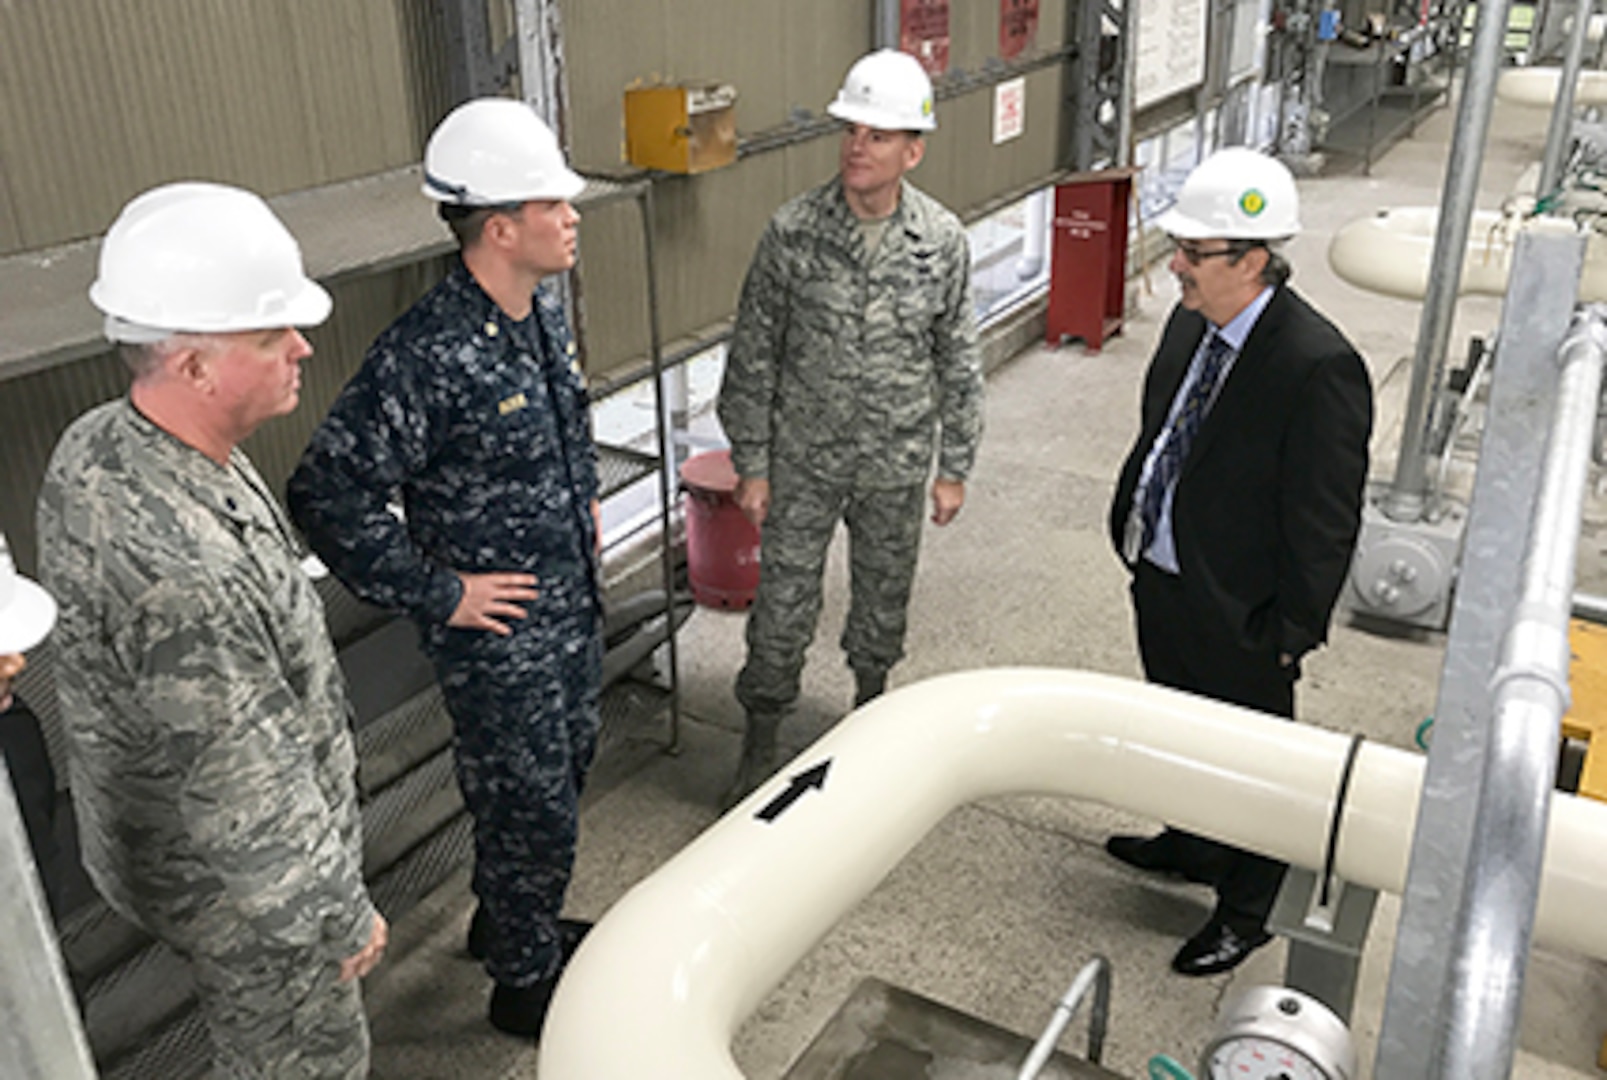 Navy Lt. Cmdr. Joe Bossi, Fleet Logistics Center Yokosuka fuel director, shows DLA Energy Commander Air Force Brig. Gen. Martin Chapin (second from right) and other leaders a recently completed project that improves fuel pumping capability at Defense Fuel Support Point Hakozaki on the island of Azuma located within Tokyo Bay, Japan, Oct. 28. 